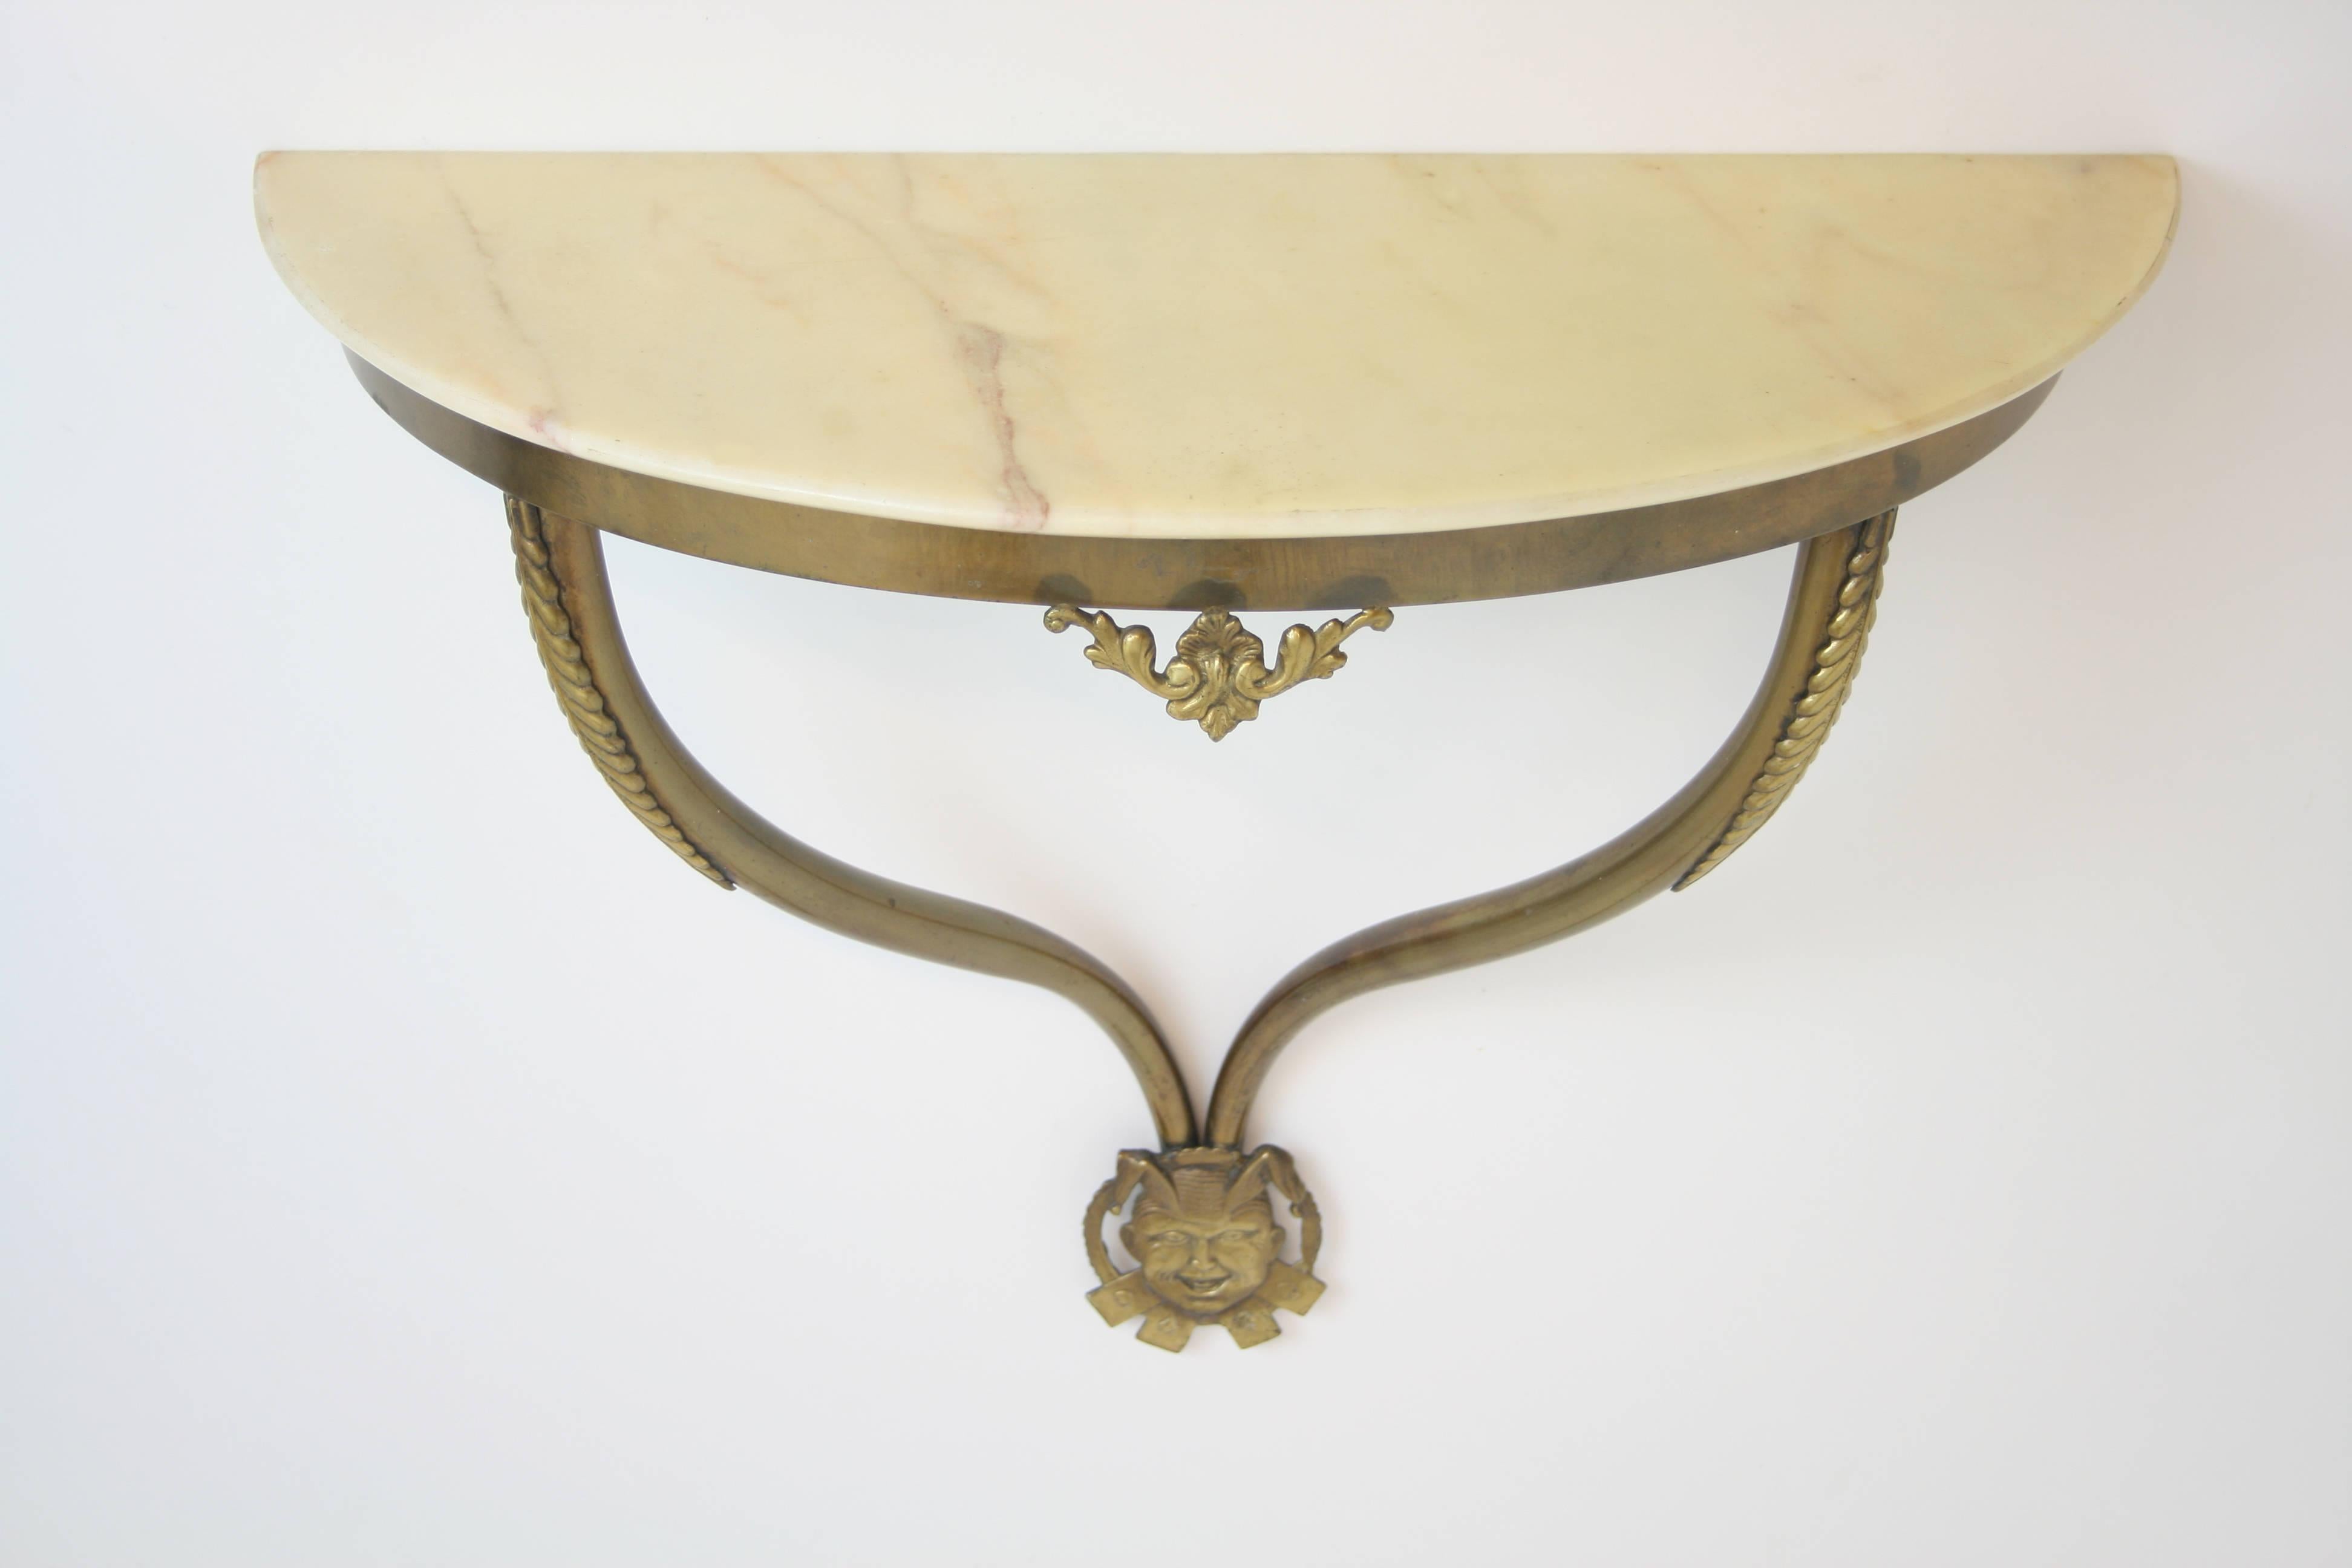 Very rare console with a frame of solid brass and a marble top. Most probably this piece has been part of a facility of a casino in Italy in the early 1950s. Its design language is strongly reminiscent of works by Gio Ponti. An eye-catching relief